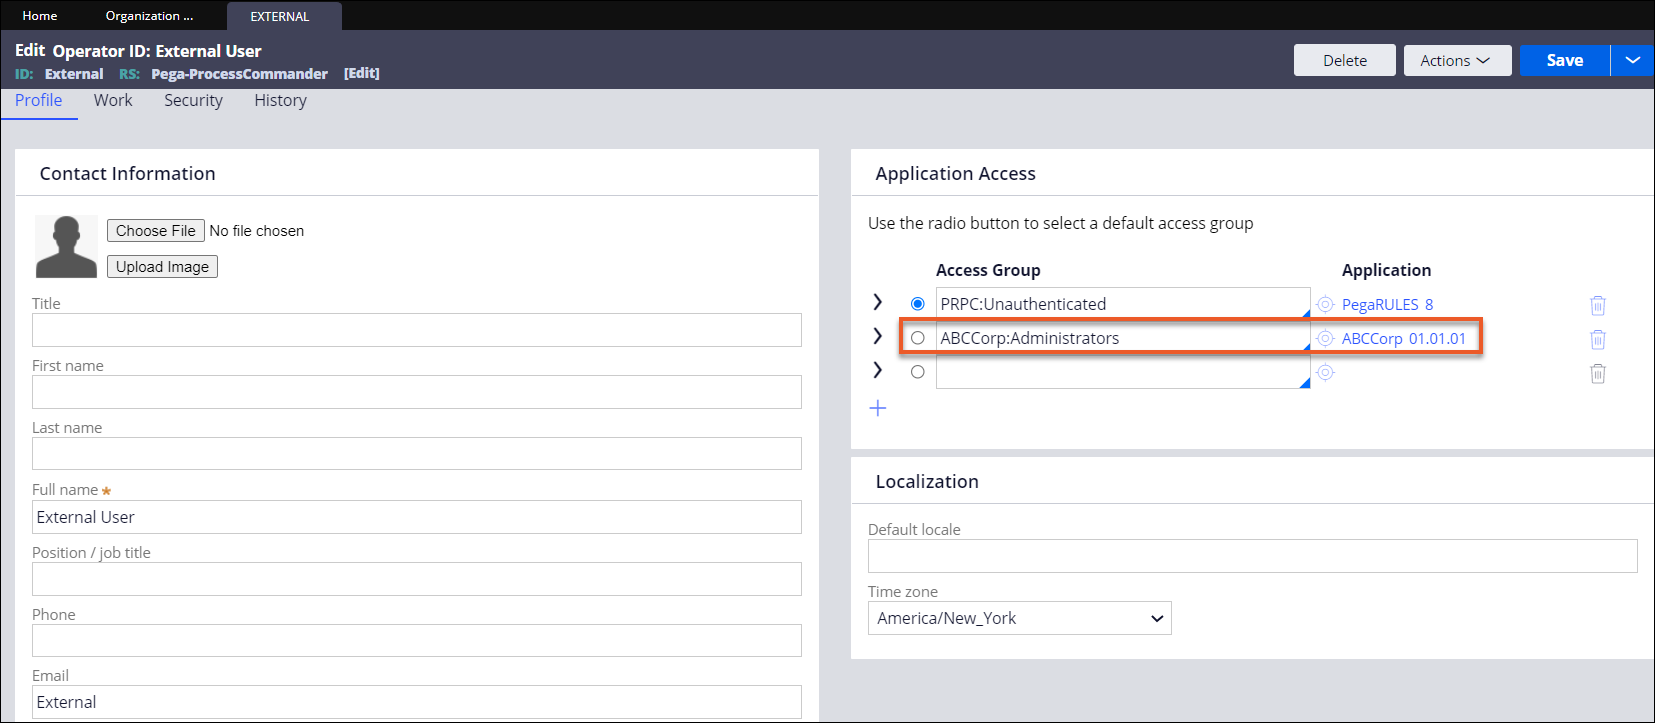 Adding a new access group for the external user